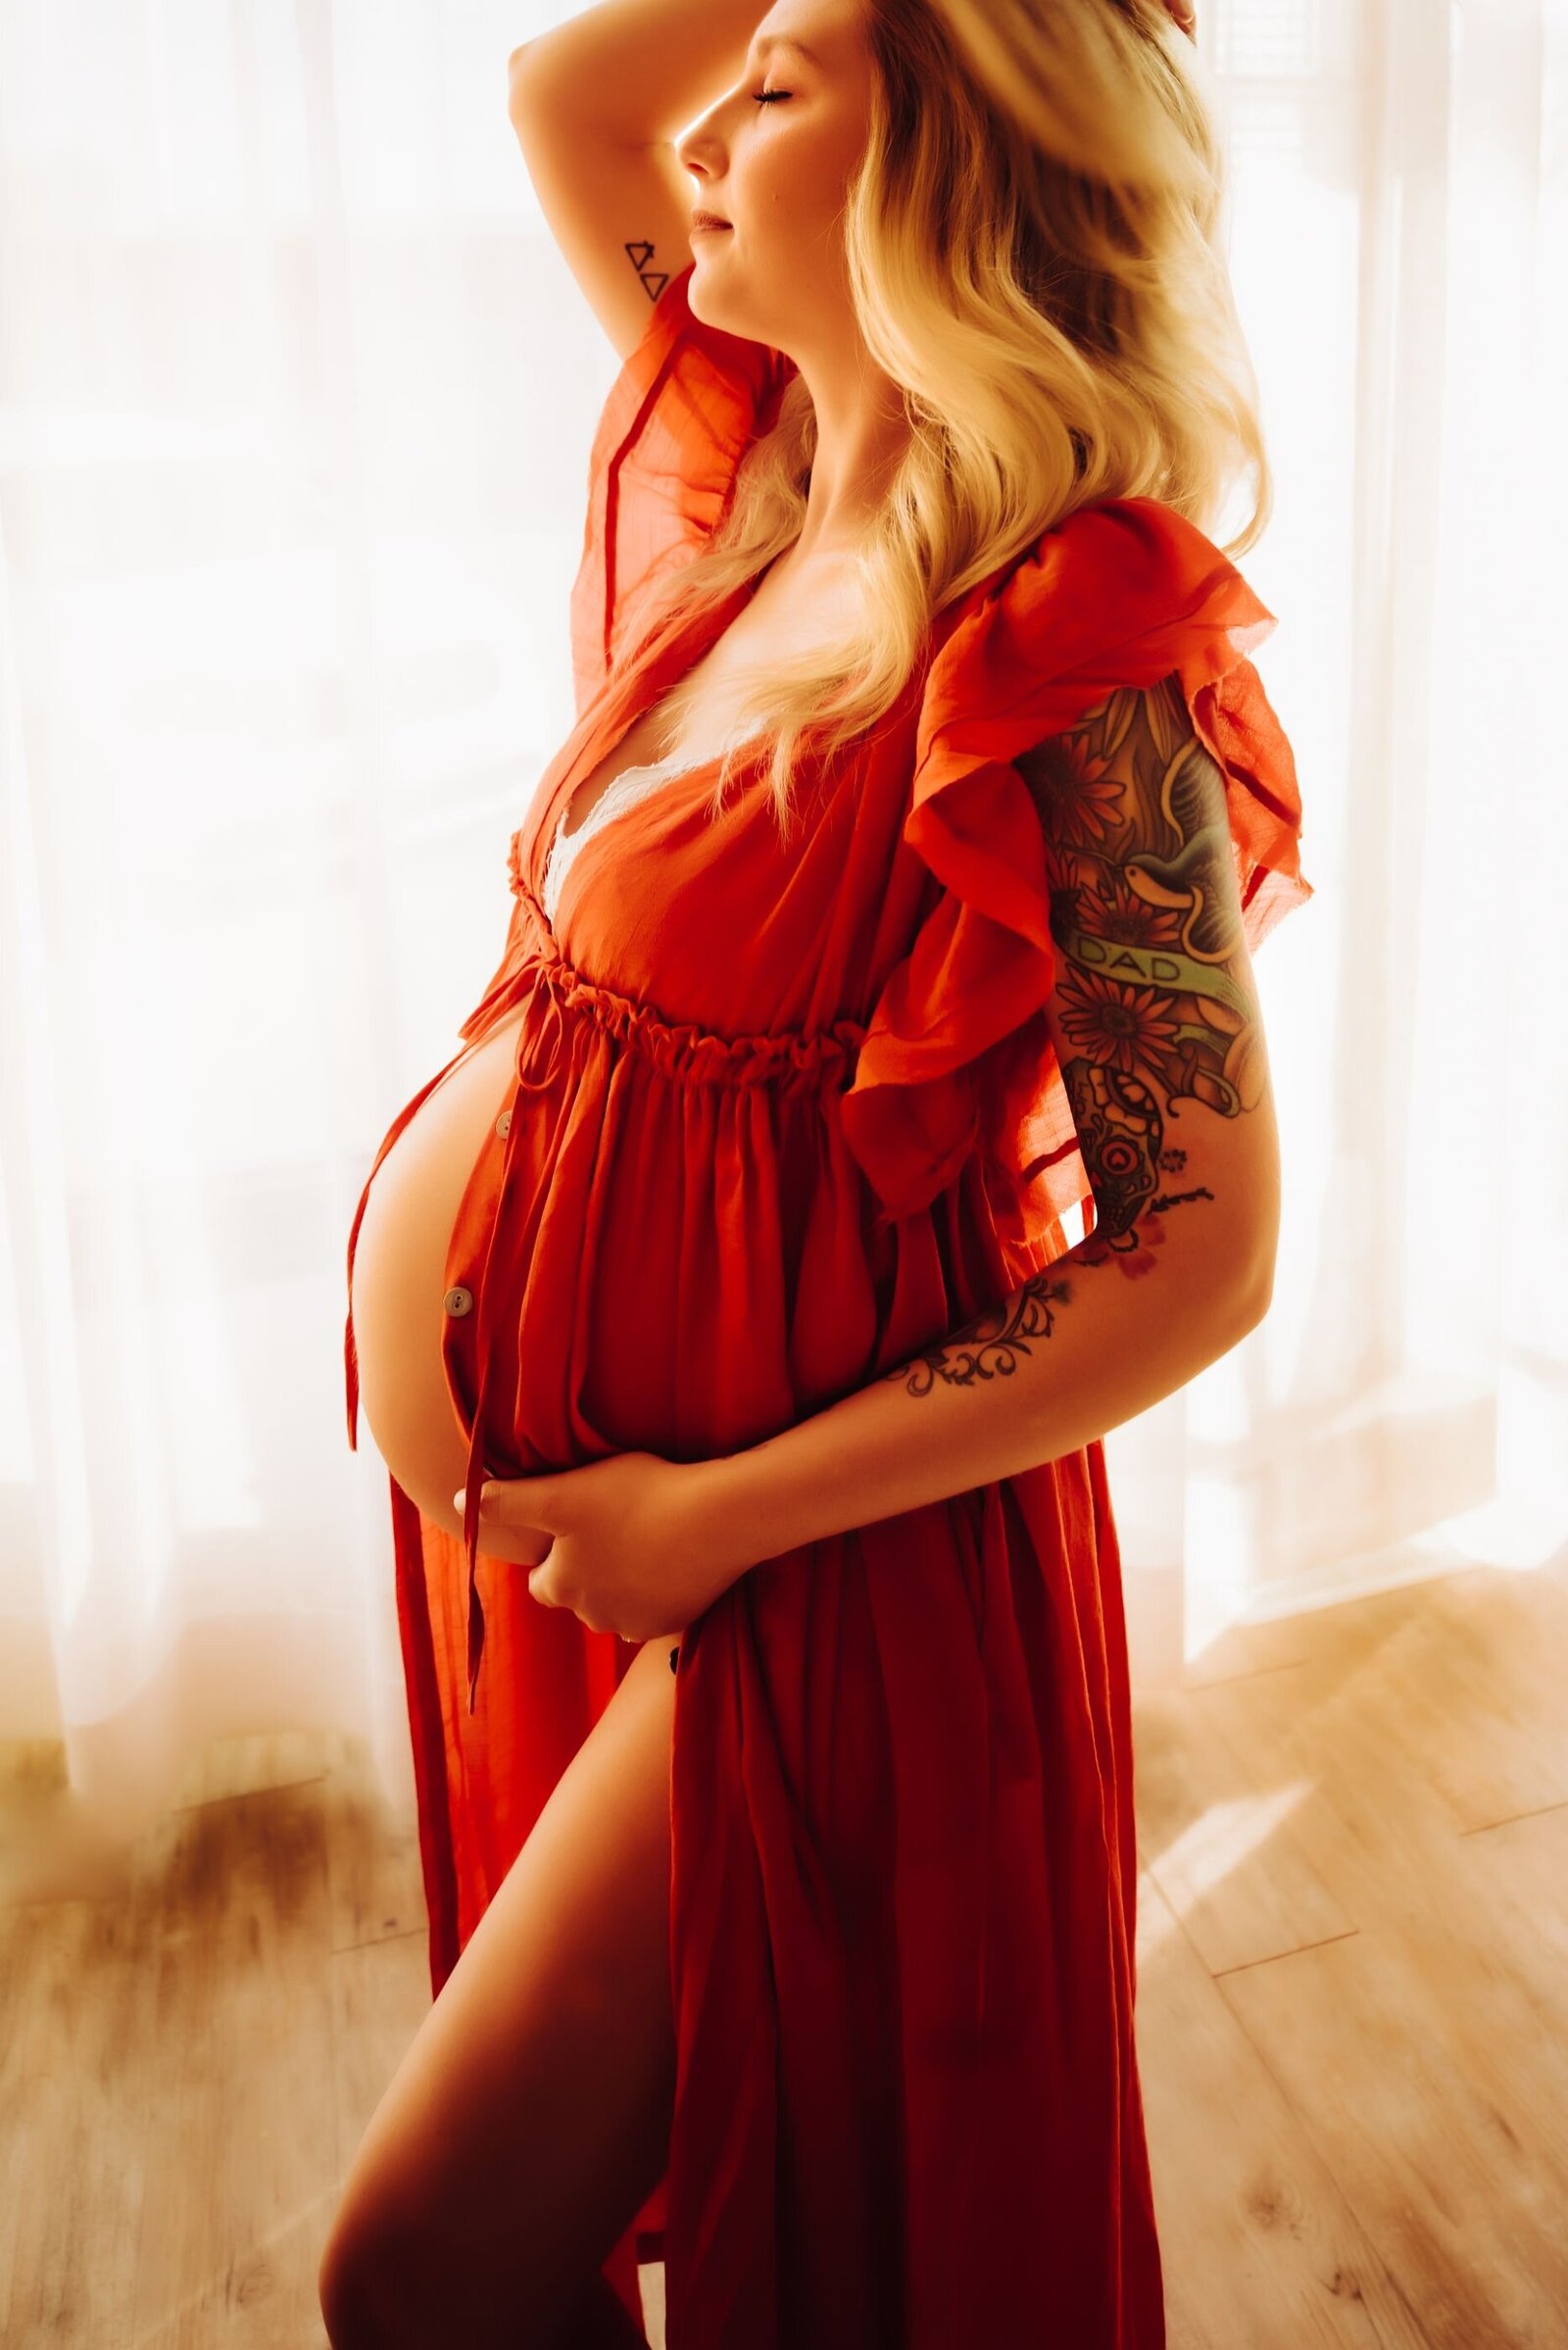 a pregnant woman in a red dress that exposes her belly. she is standing with one arm over her head and the other hand gently holding her belly. captured by Infinite Productions